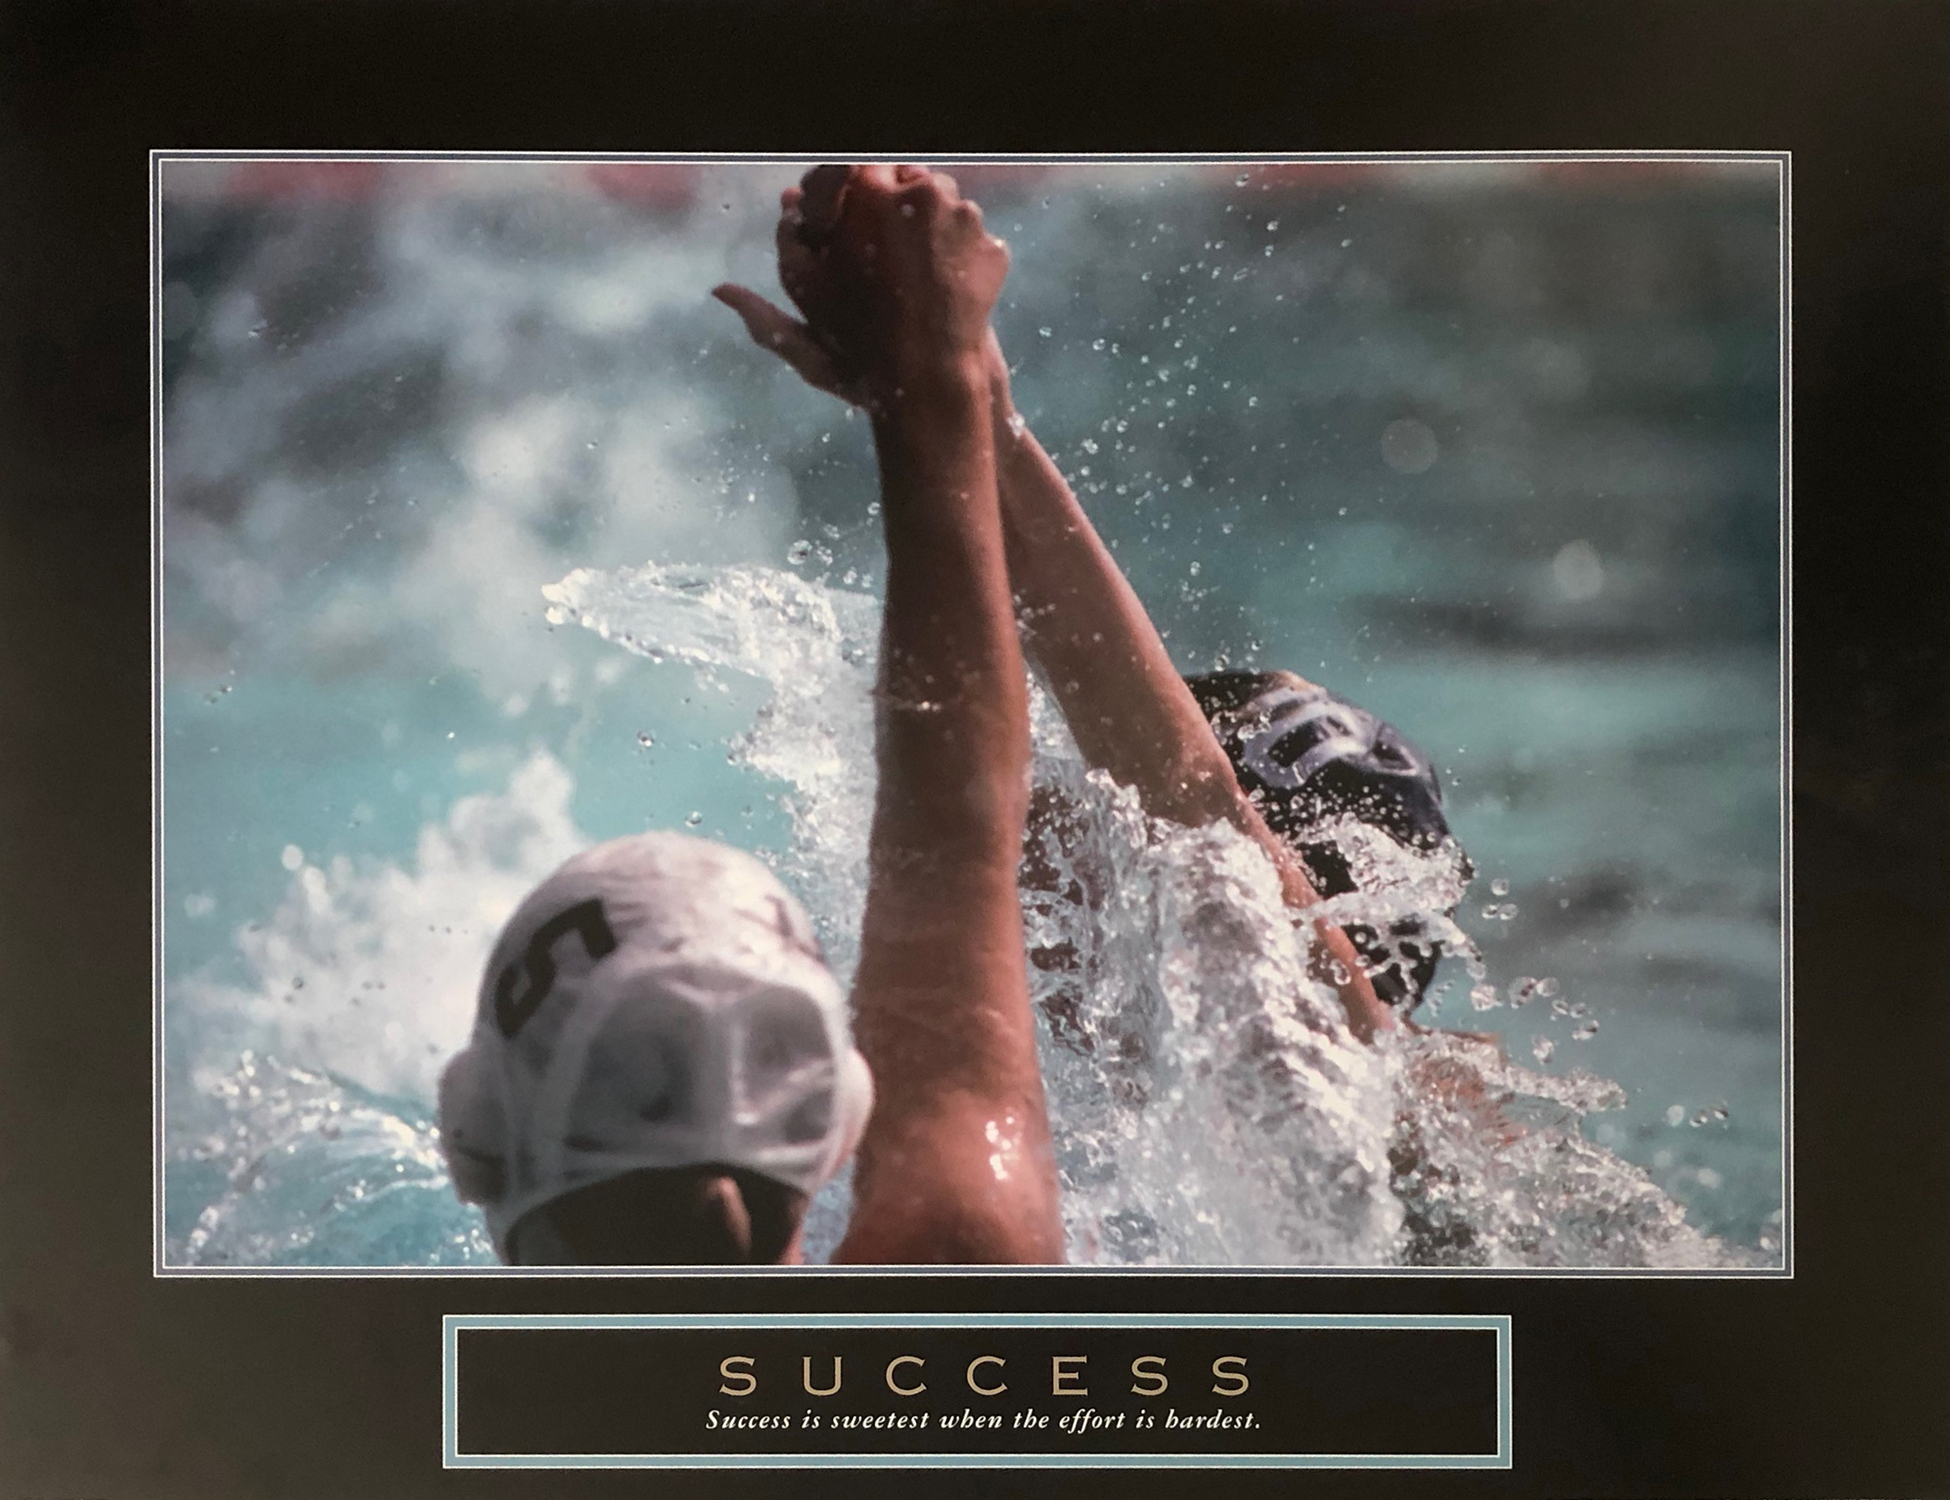 Success - Swimmers